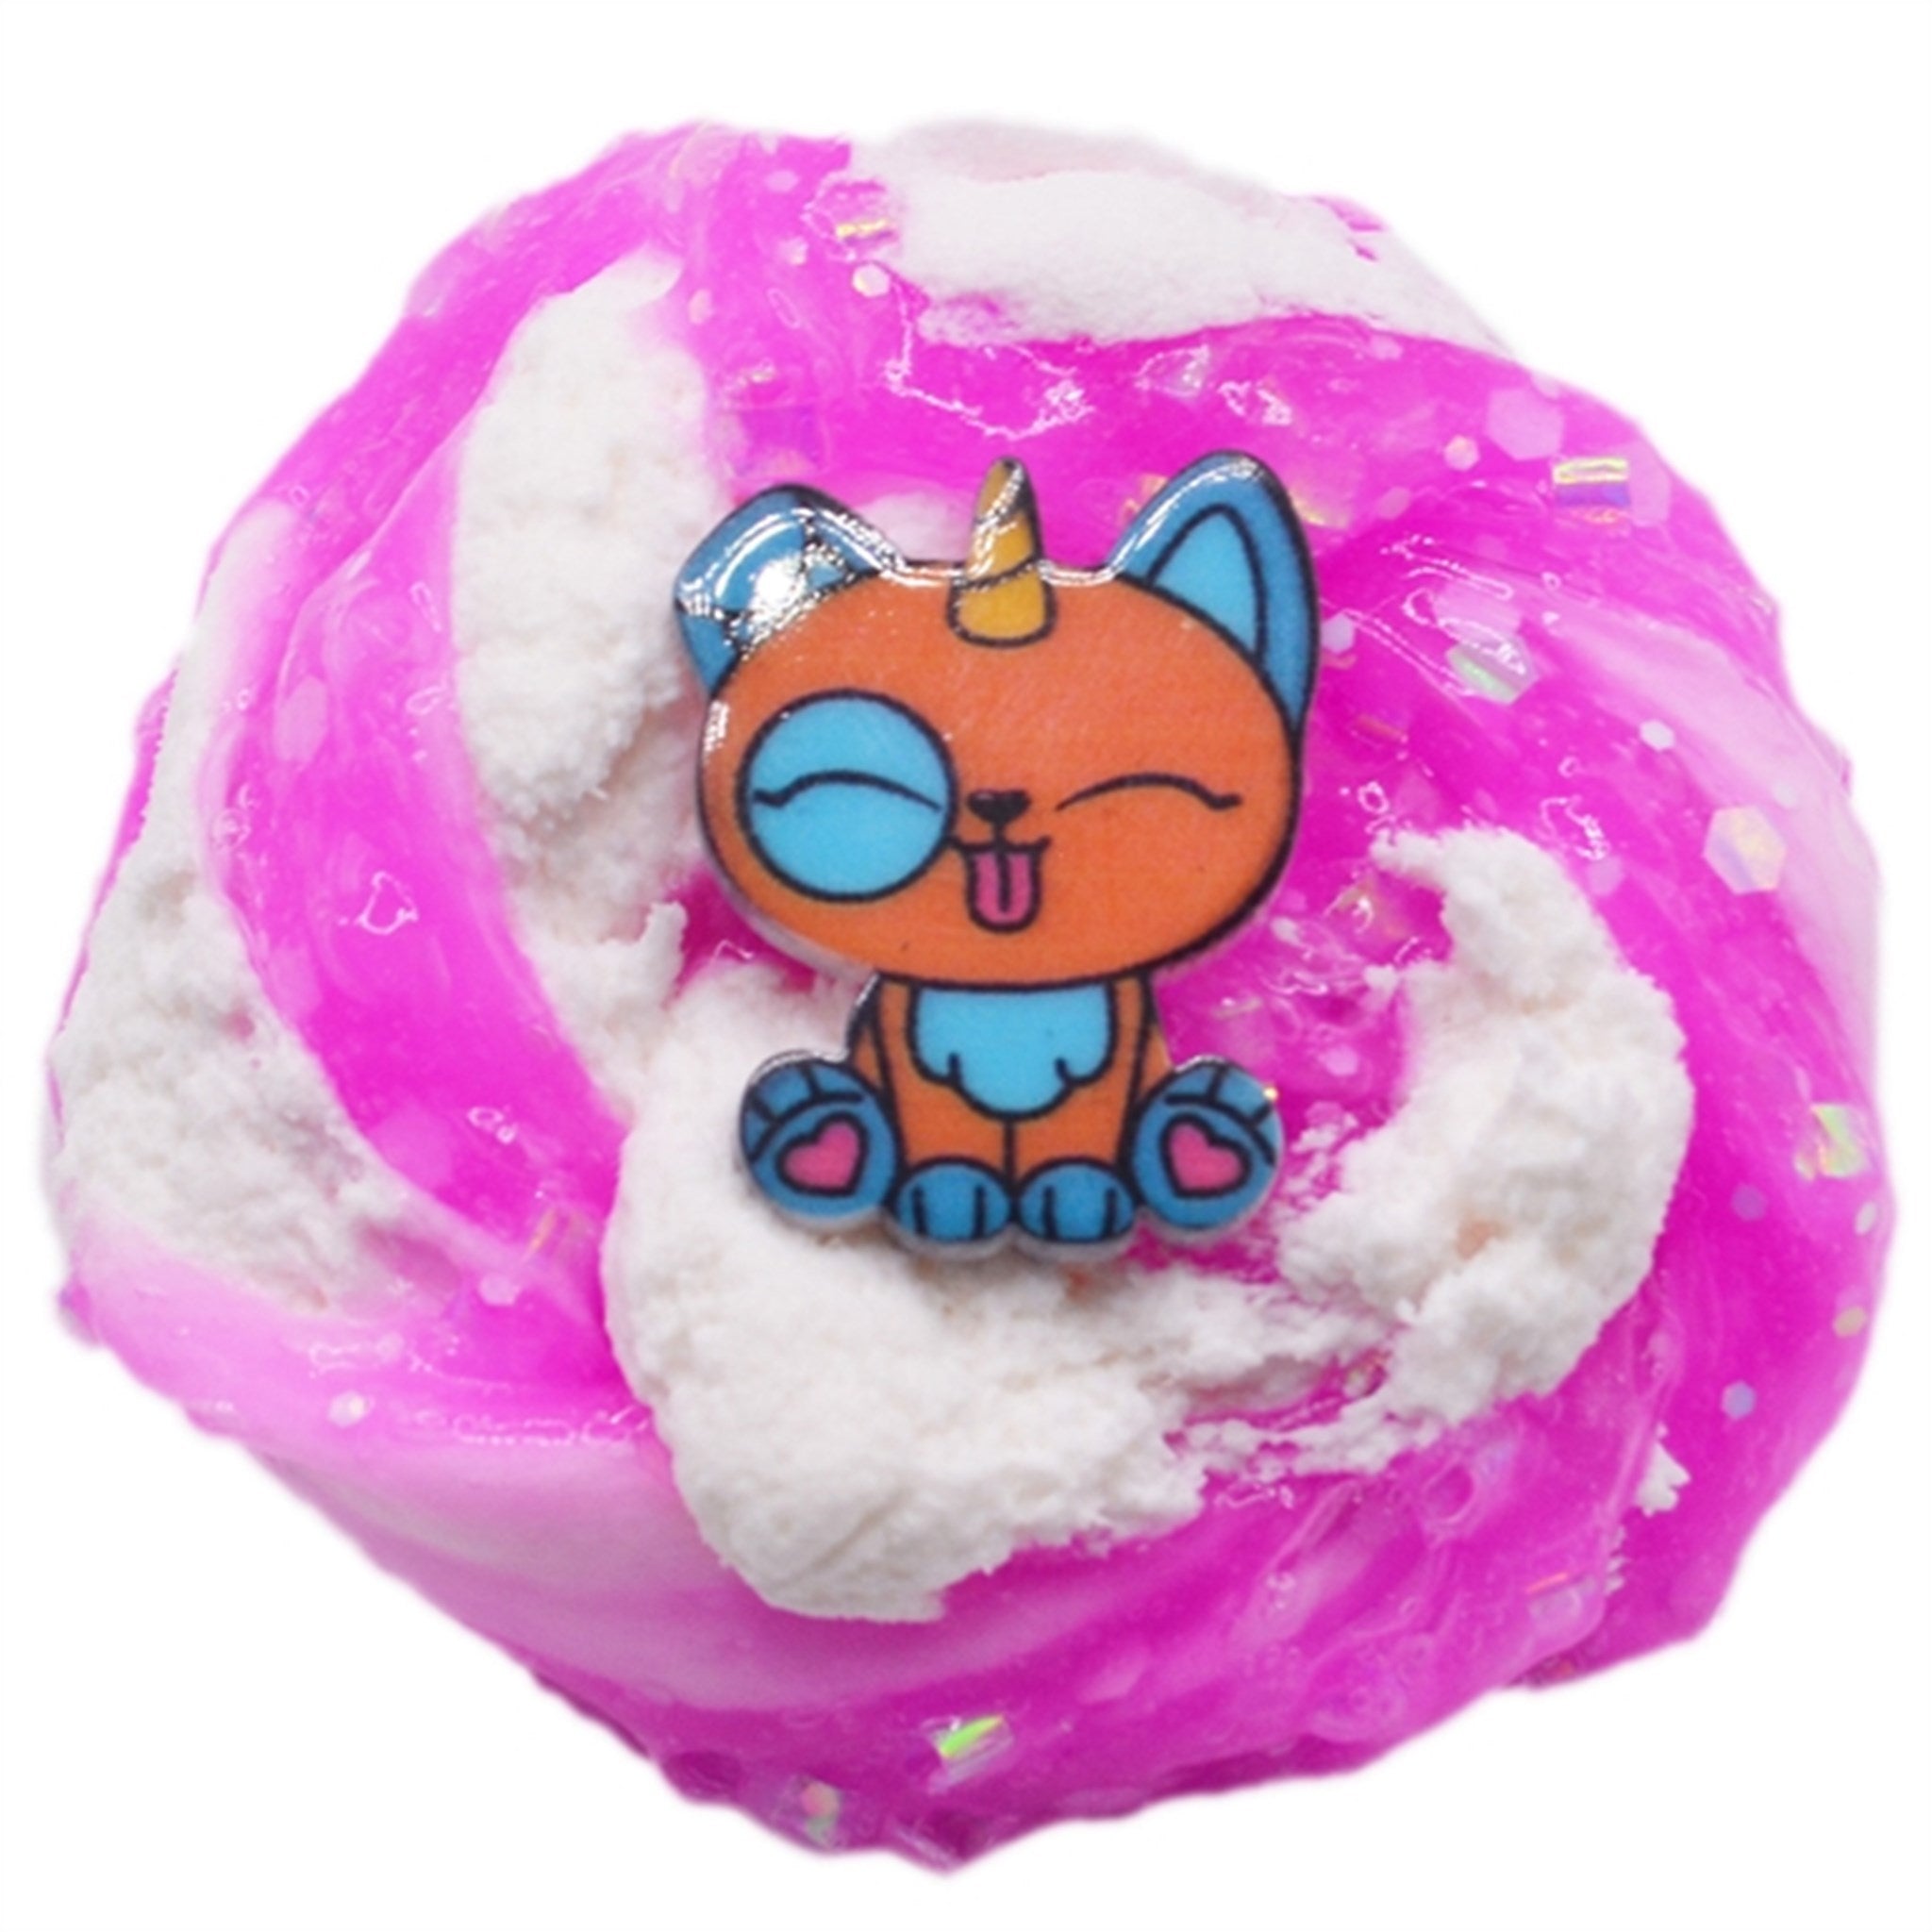 Compound Kings Scented Slime Bingsu Cuties Vanilla Frosted 2